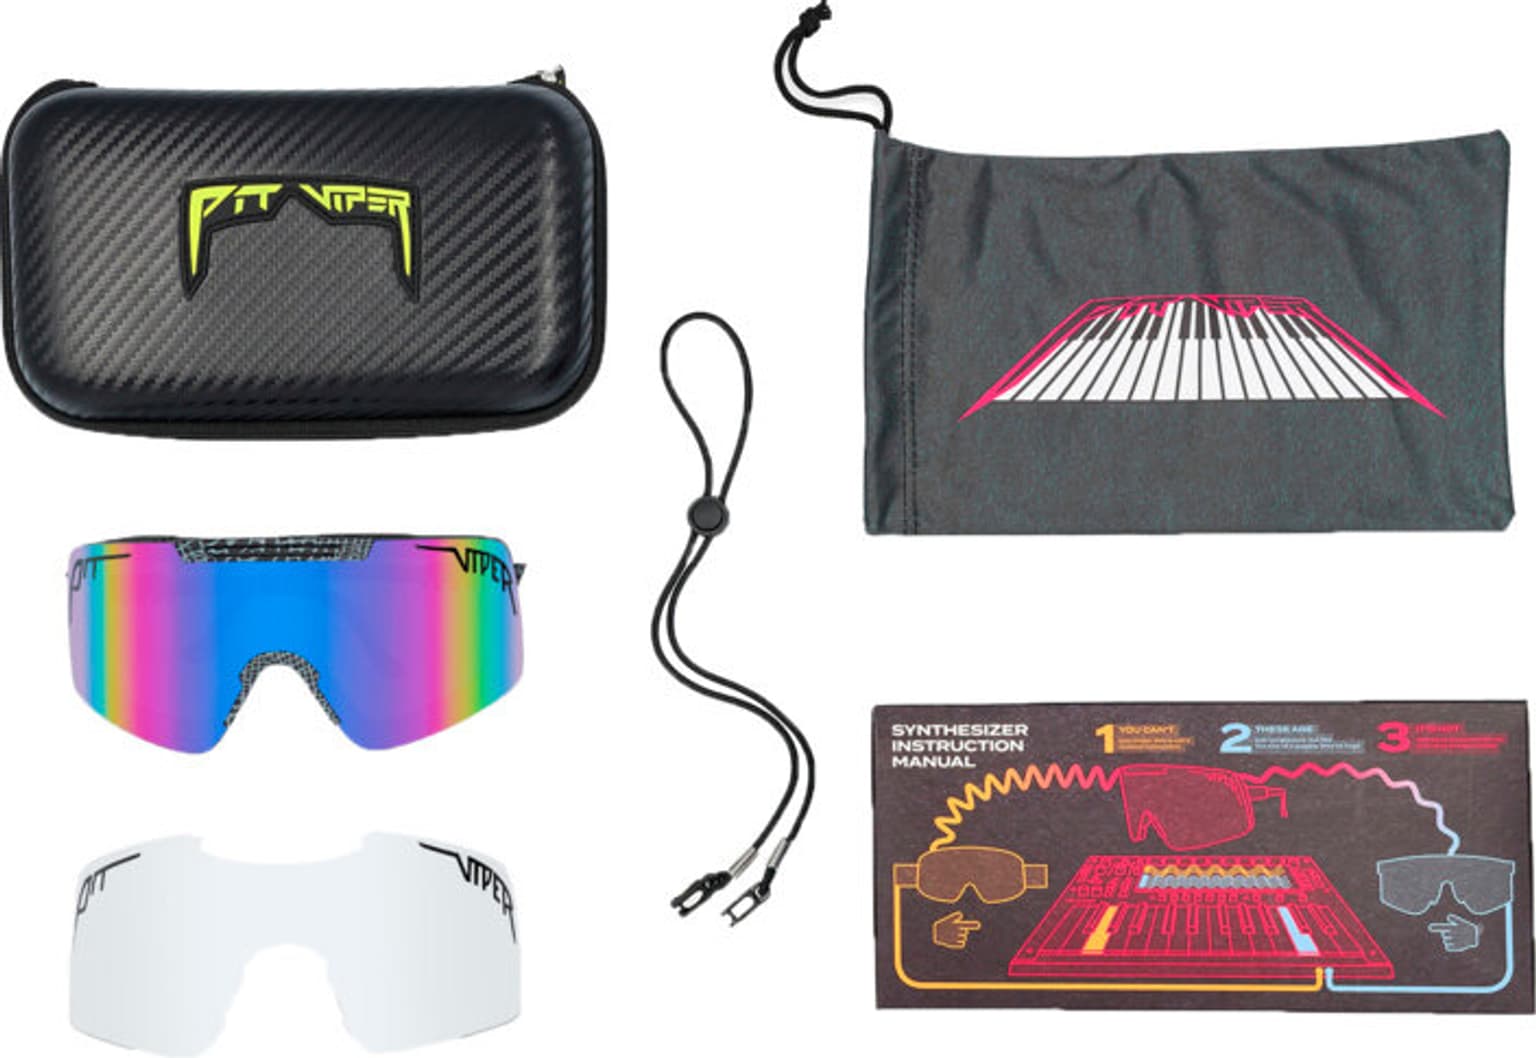 Pit Viper Pit Viper The Synthesizer The Mangrove Lunettes de sport 3